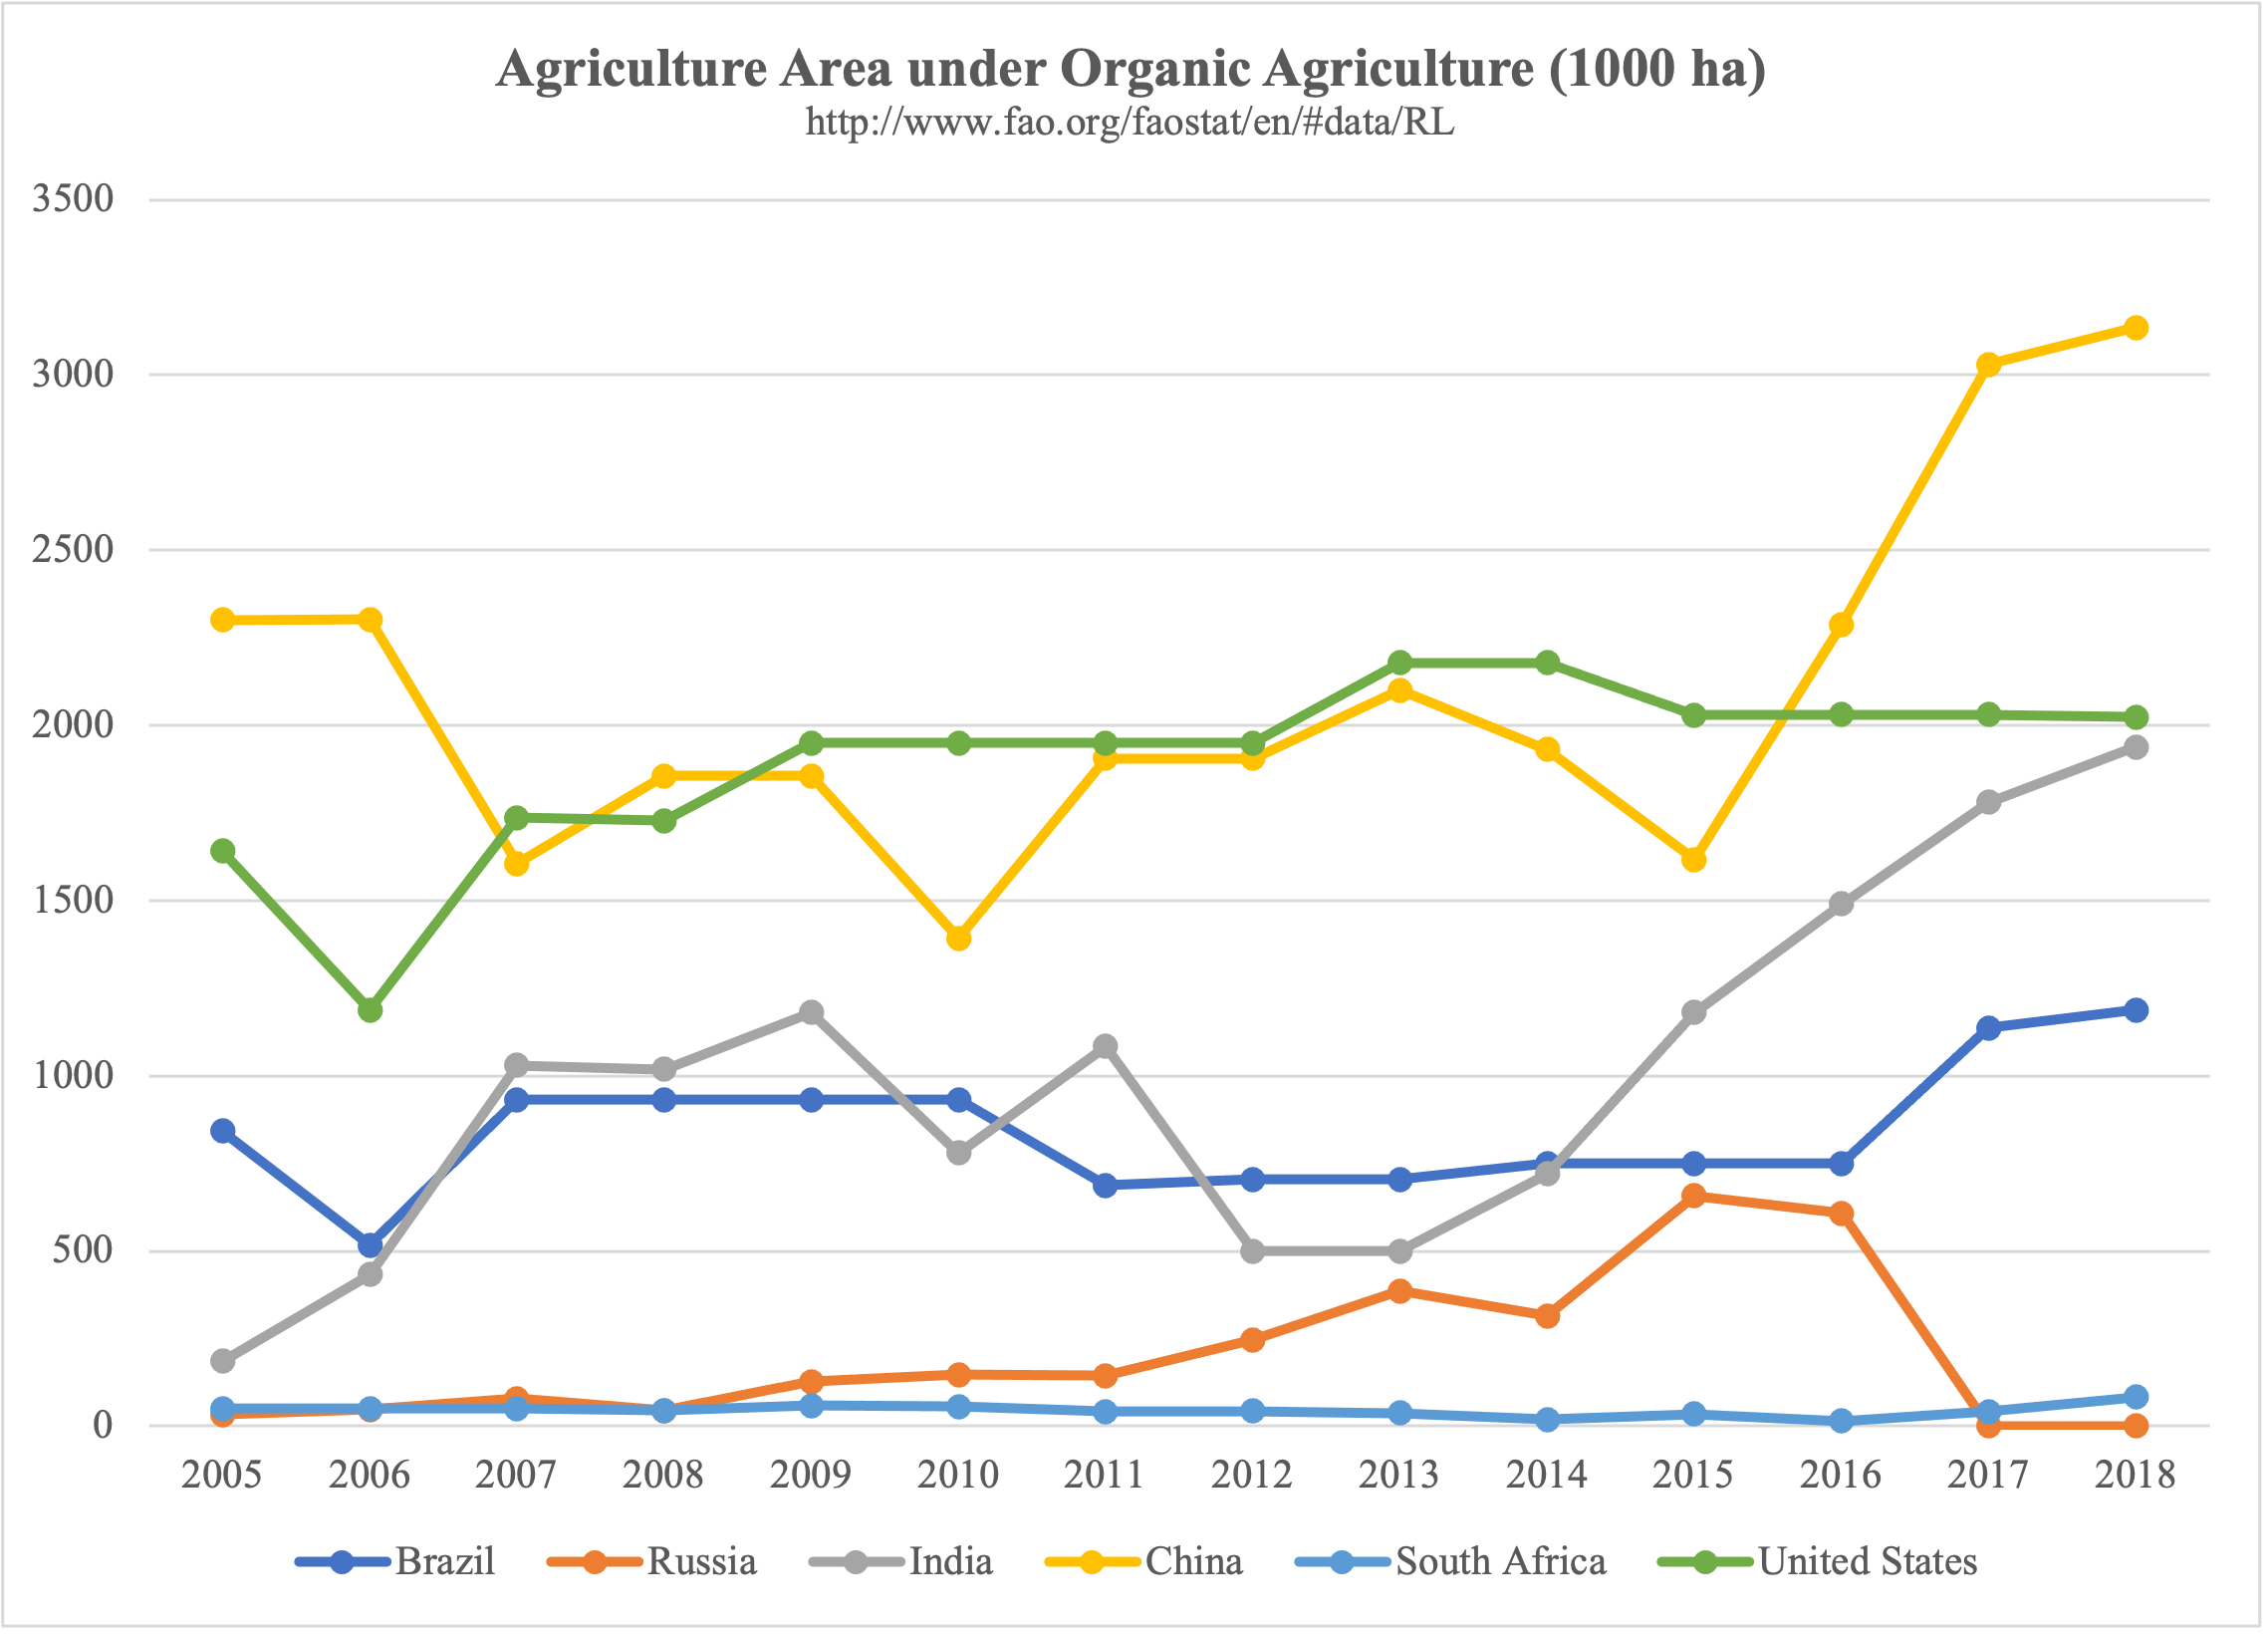 Figure 11. Agriculture area under organic agriculture (1000 ha) http://www.fao.org/faostat/en/#data/RL